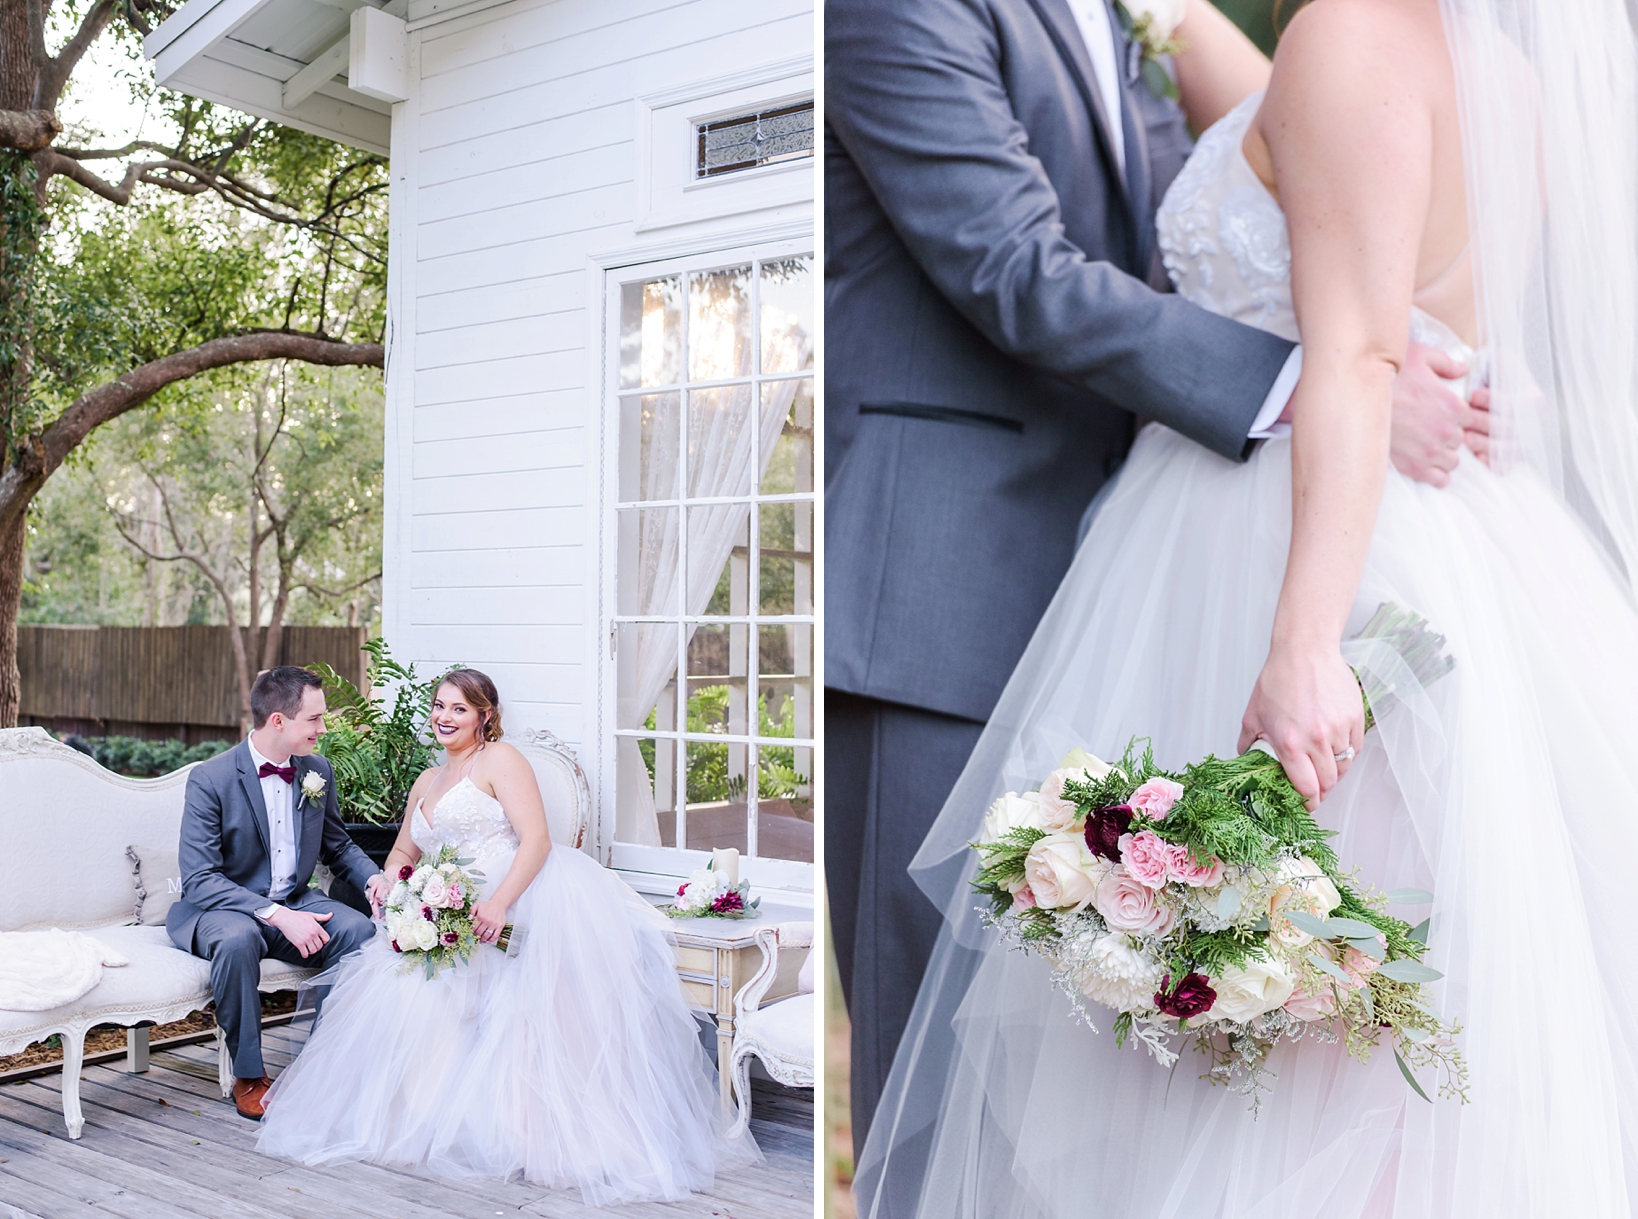 Bride and Groom after their wedding ceremony on the steps of the chapel along with a photo of the Bride's Bouquet